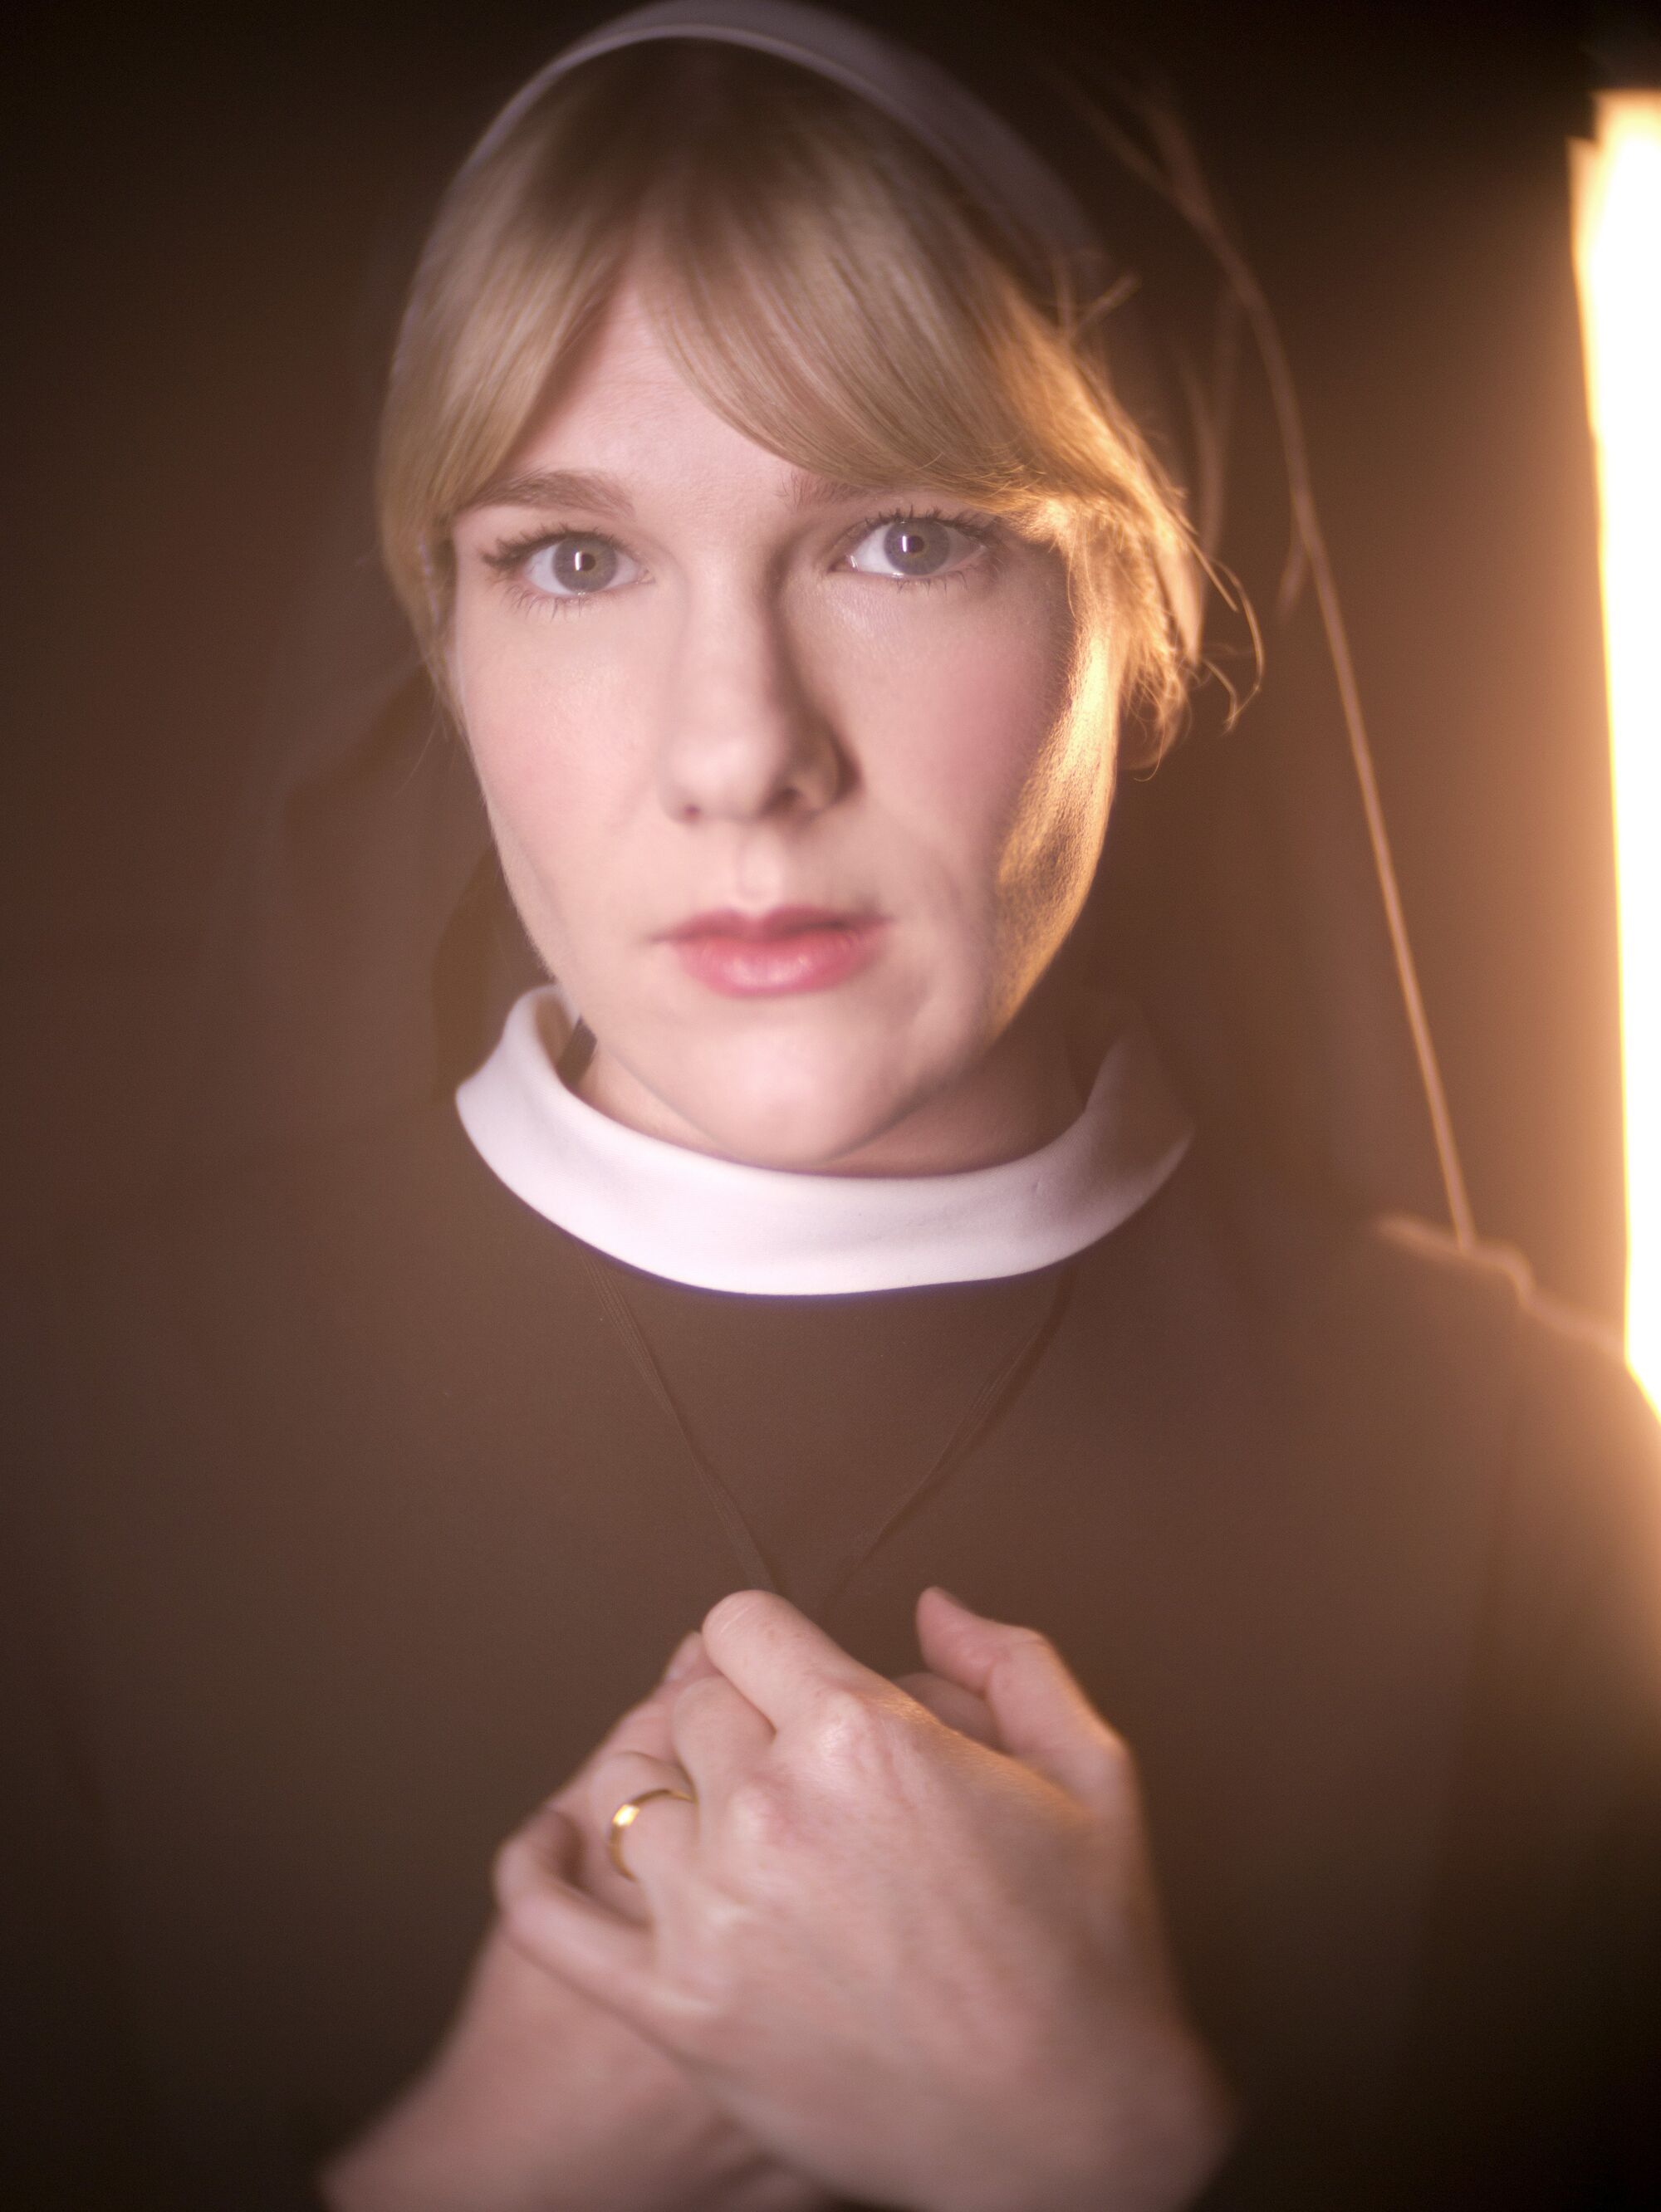 Sister Mary Eunice (née Mary Eunice McKee) is a nun serving at the sanita.....